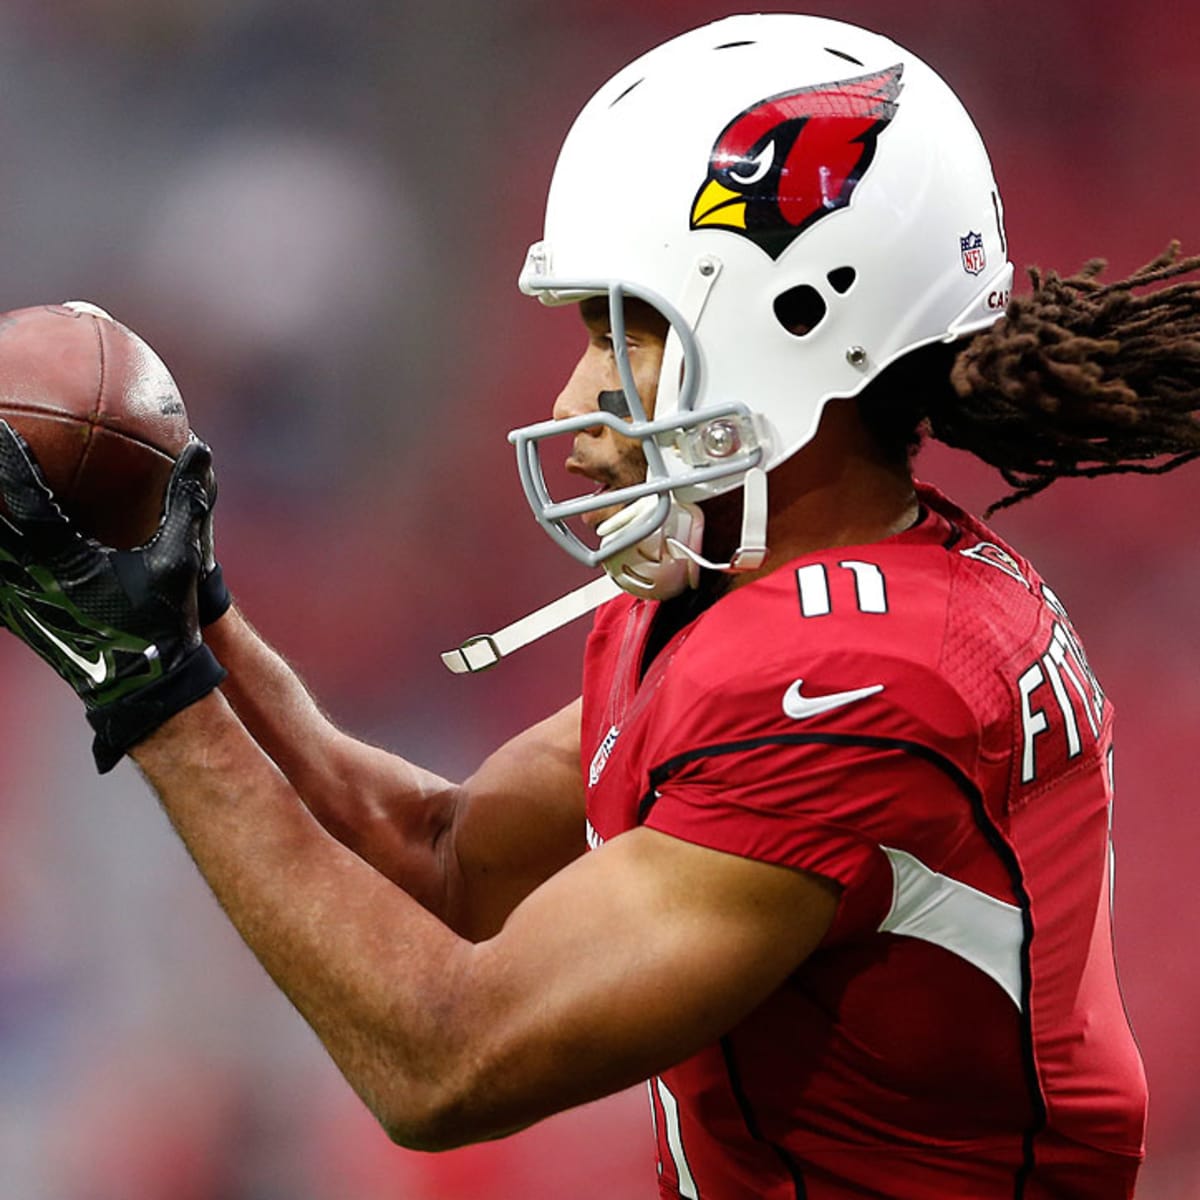 Larry Fitzgerald on his podcast said he doesn't plan on playing